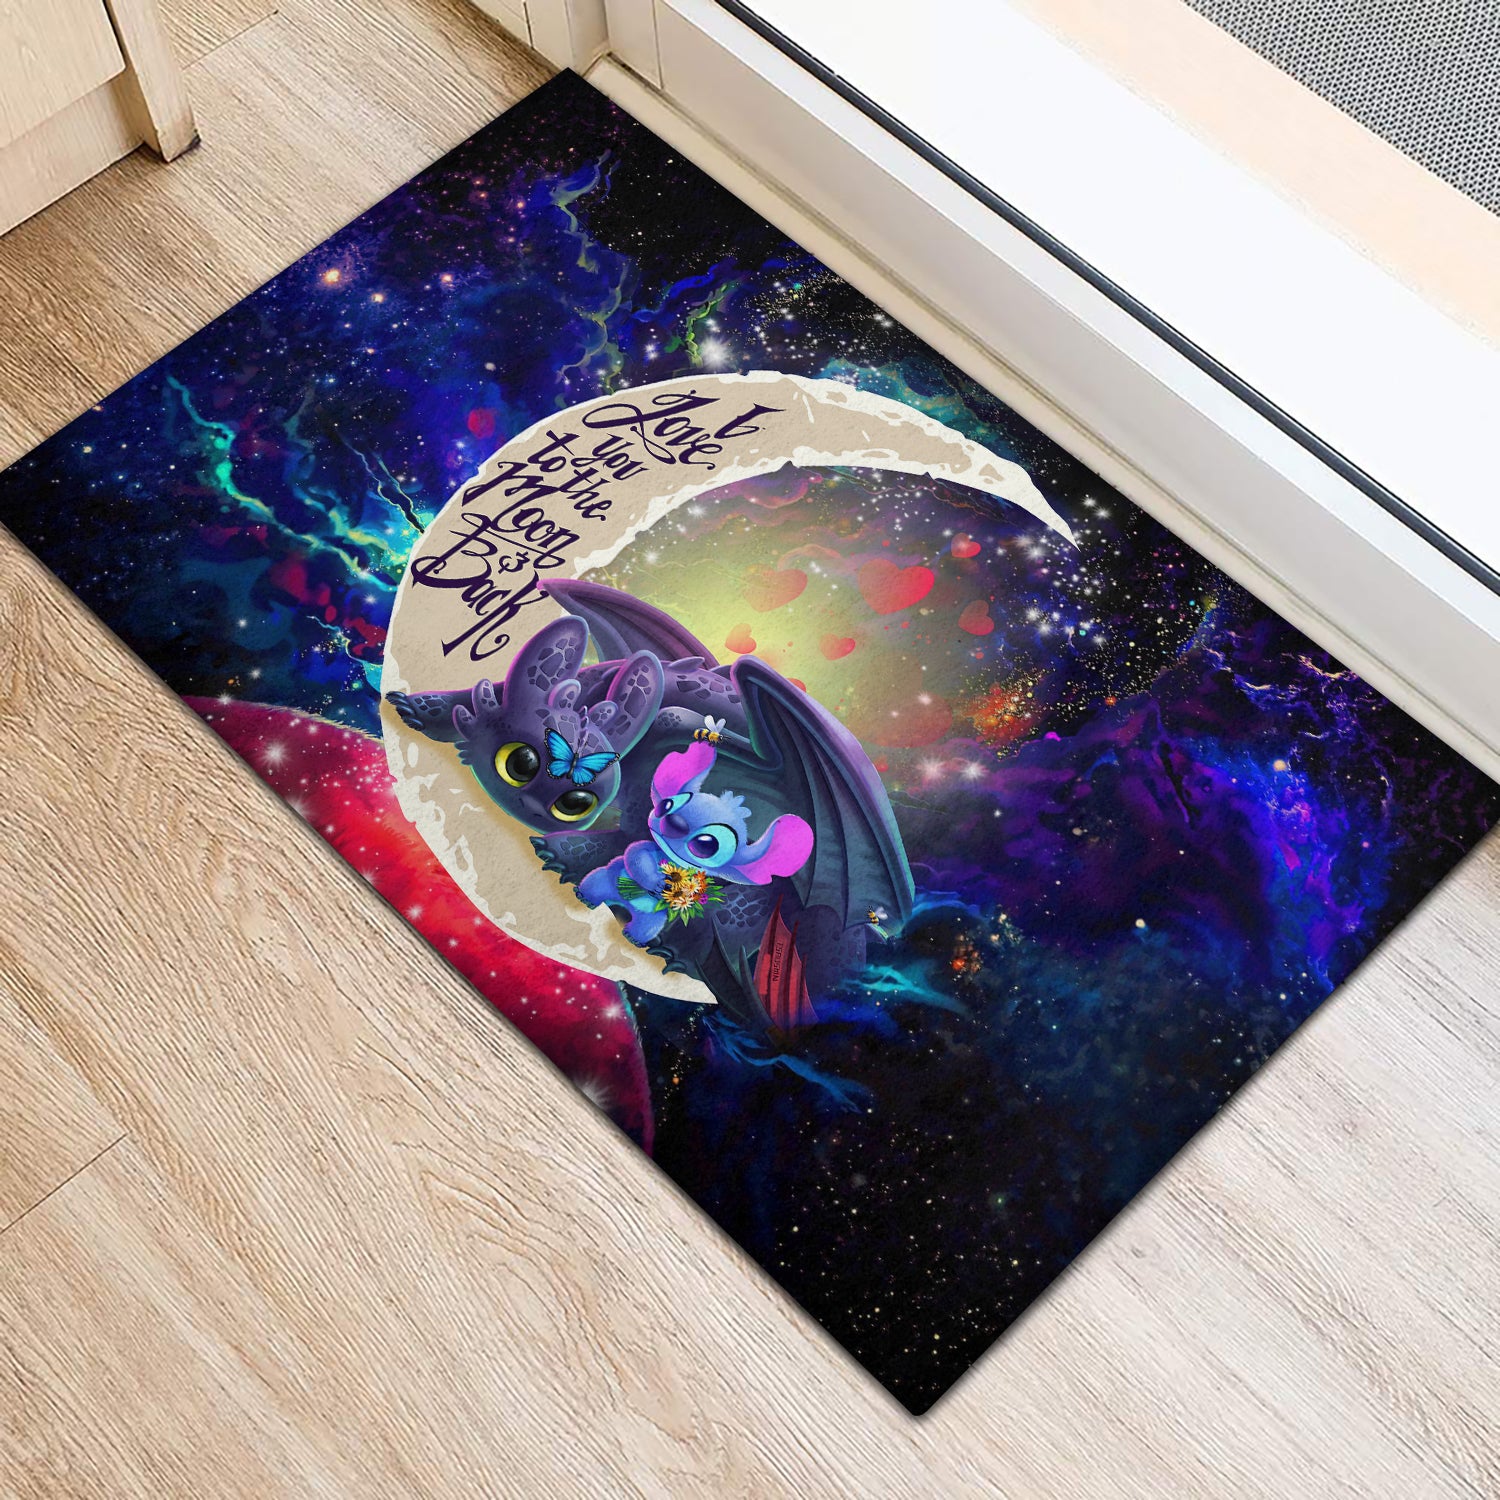 Stitch And Toothless Love You To The Moon Galaxy Doormat Home Decor Nearkii